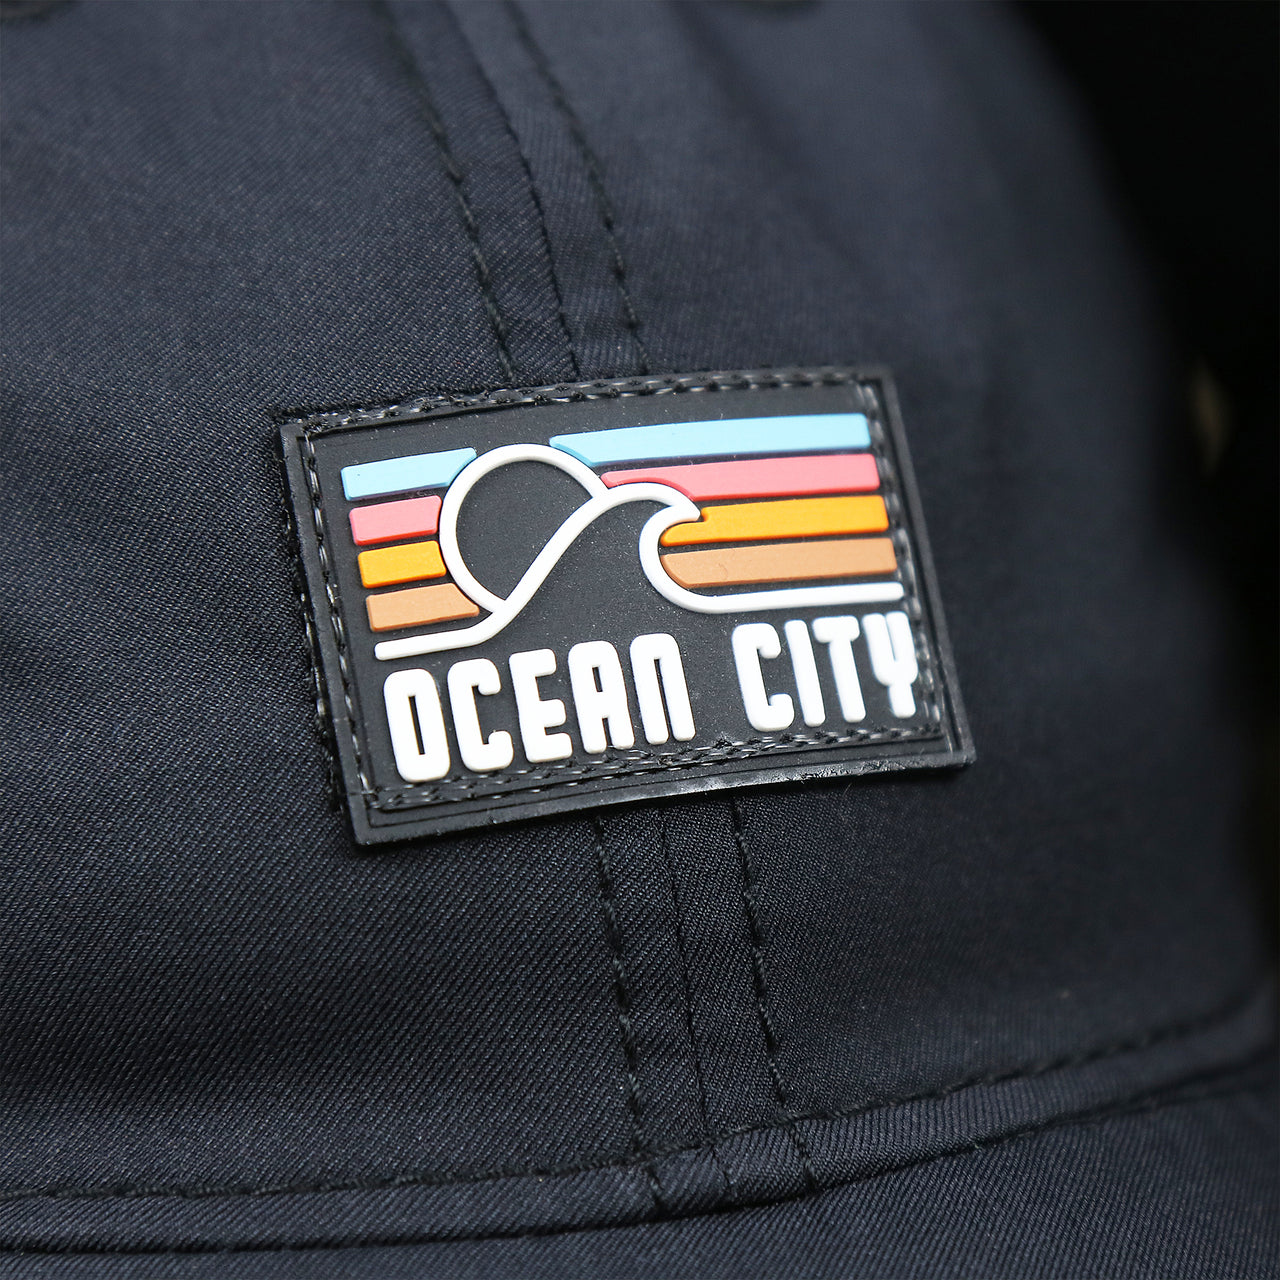 The Ocean City Sunset Rubber Patch on the New Jersey High Point PVC Ocean City Rubber Patch Cool Fit Adjustable Dad Hat | Black Dad Hat